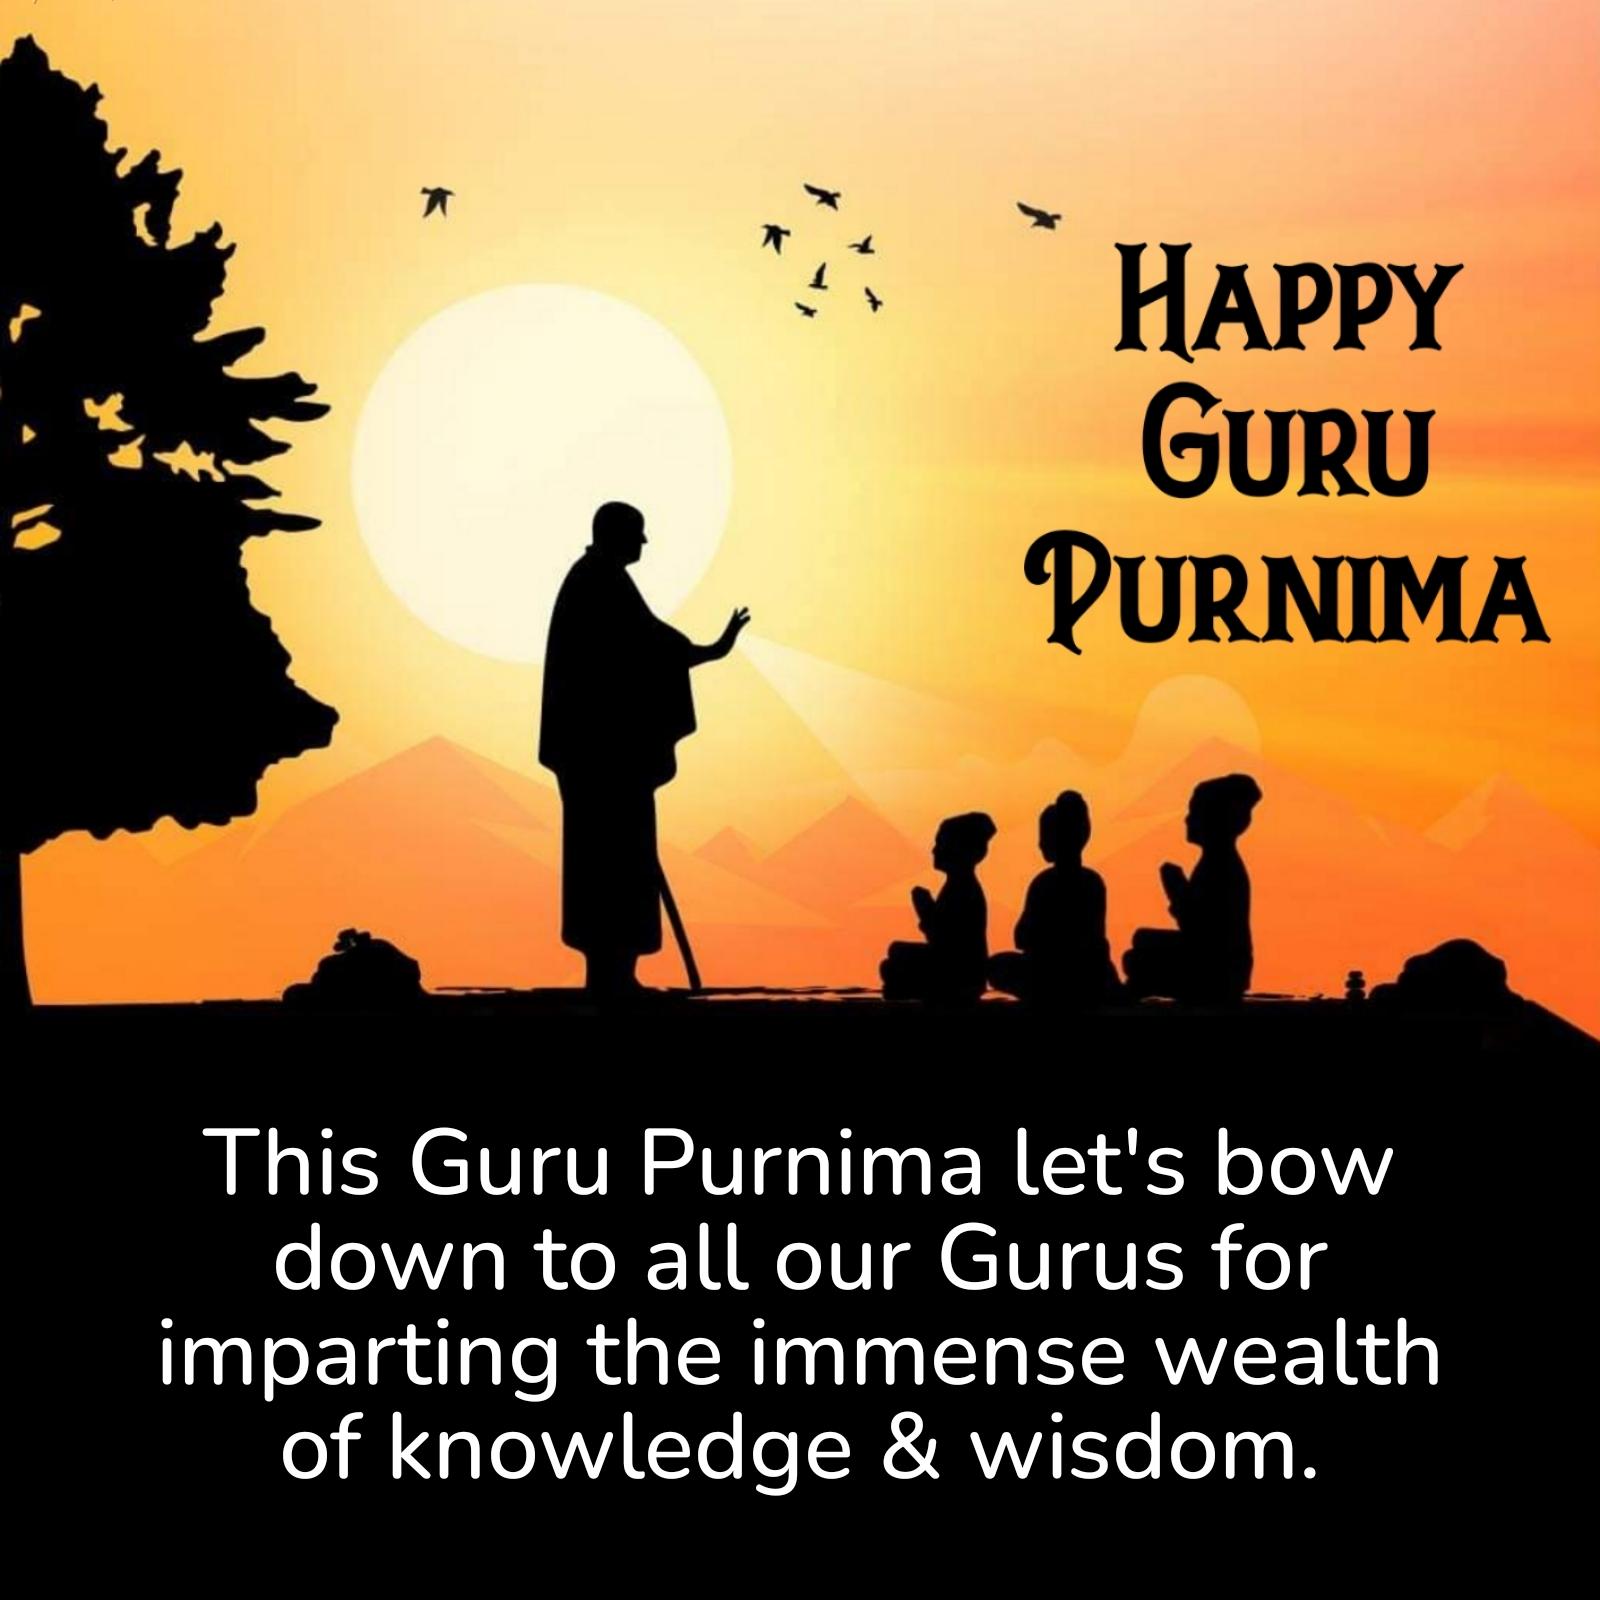 This Guru Purnima let's bow down to all our Gurus